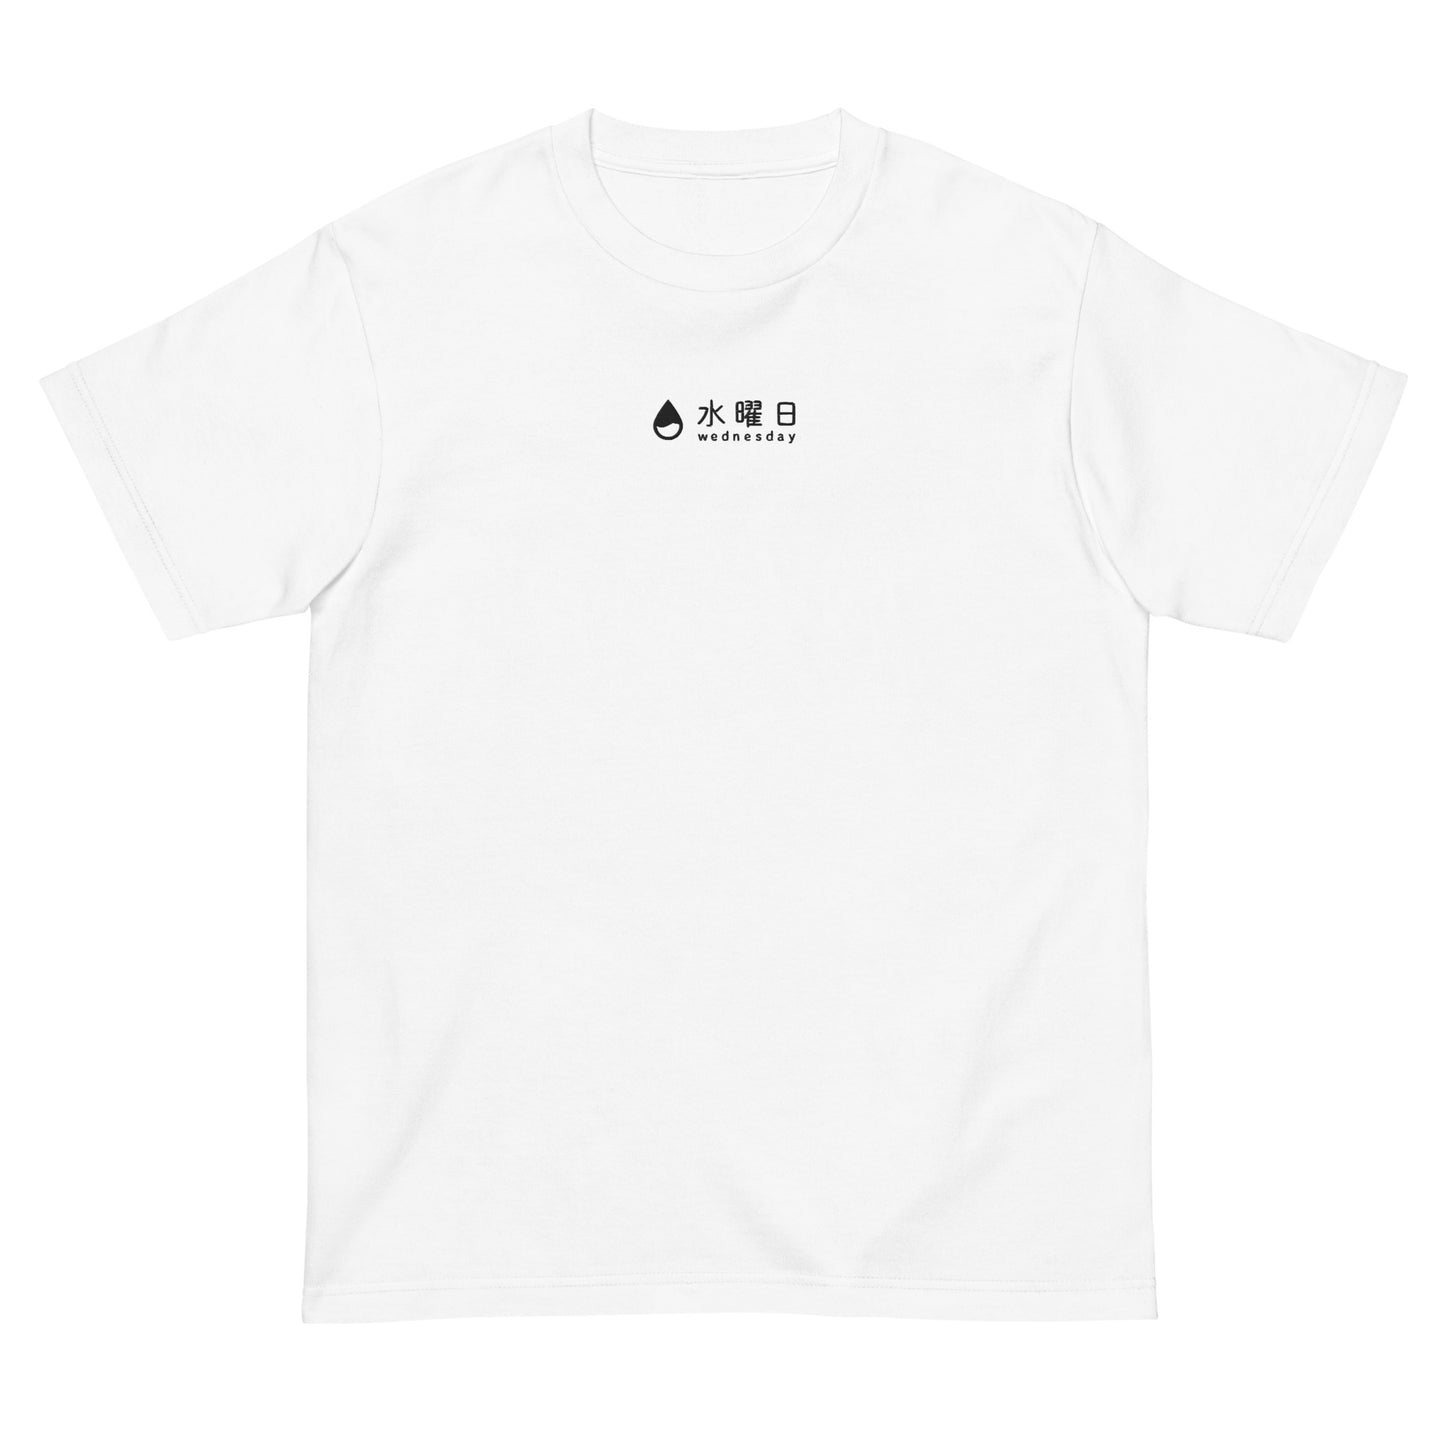 White High Quality Tee - Front Design with a white Embroidery "Wednesday" in Japanese and English